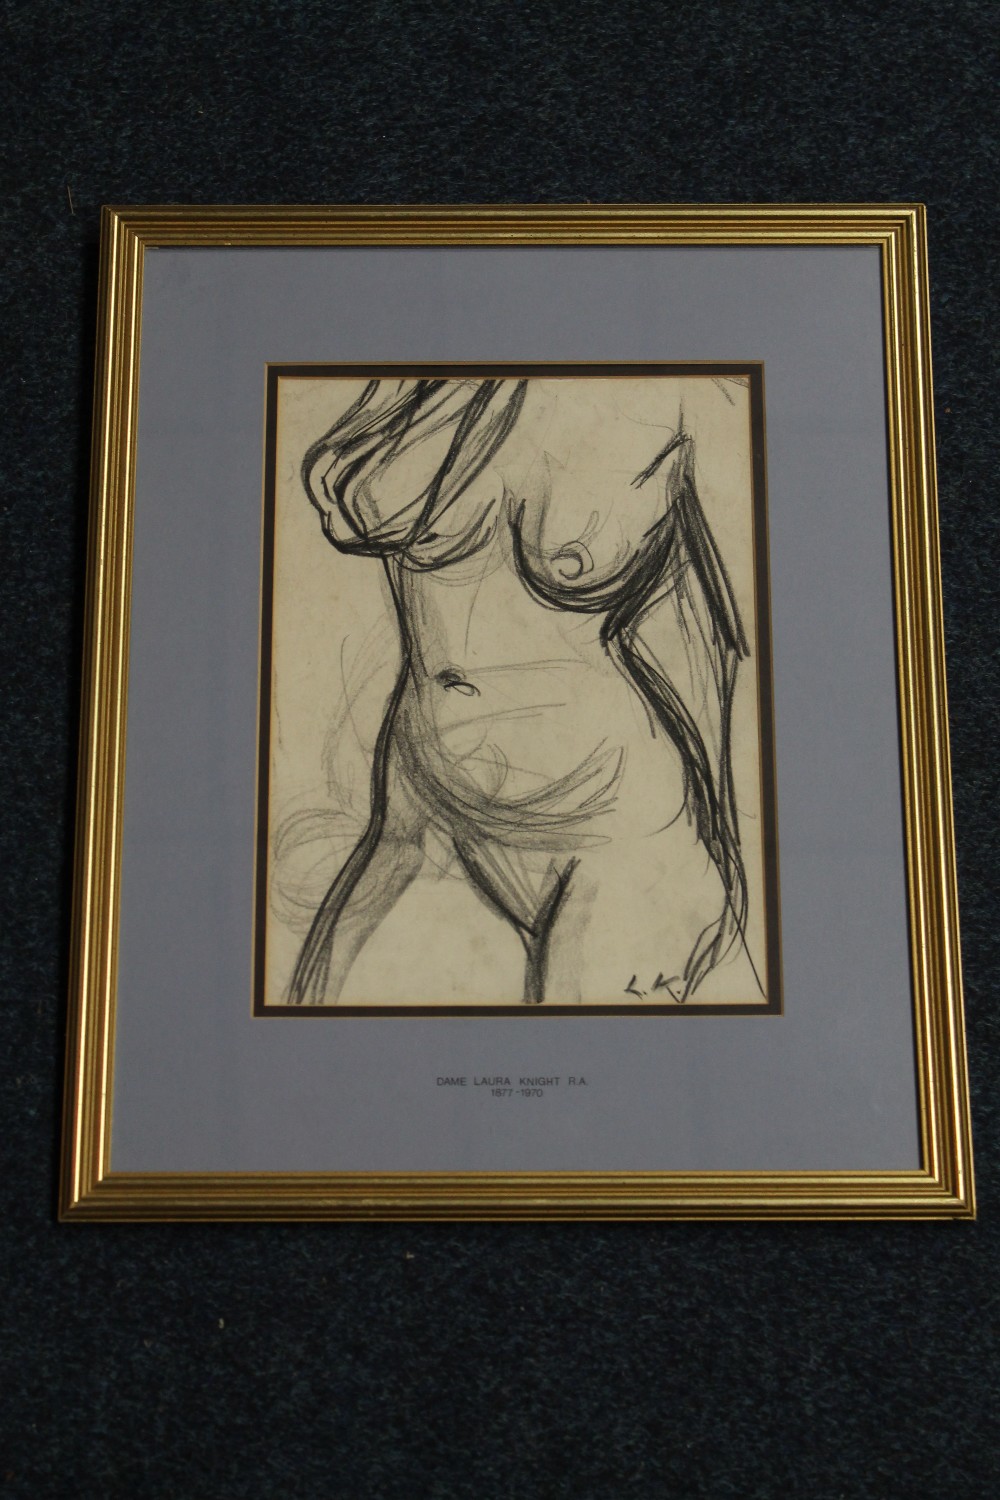 A SIGNED SKETCH OF A NUDE BY DAME LAURA KNIGHT R.A., framed and glazed, signed to the bottom right c